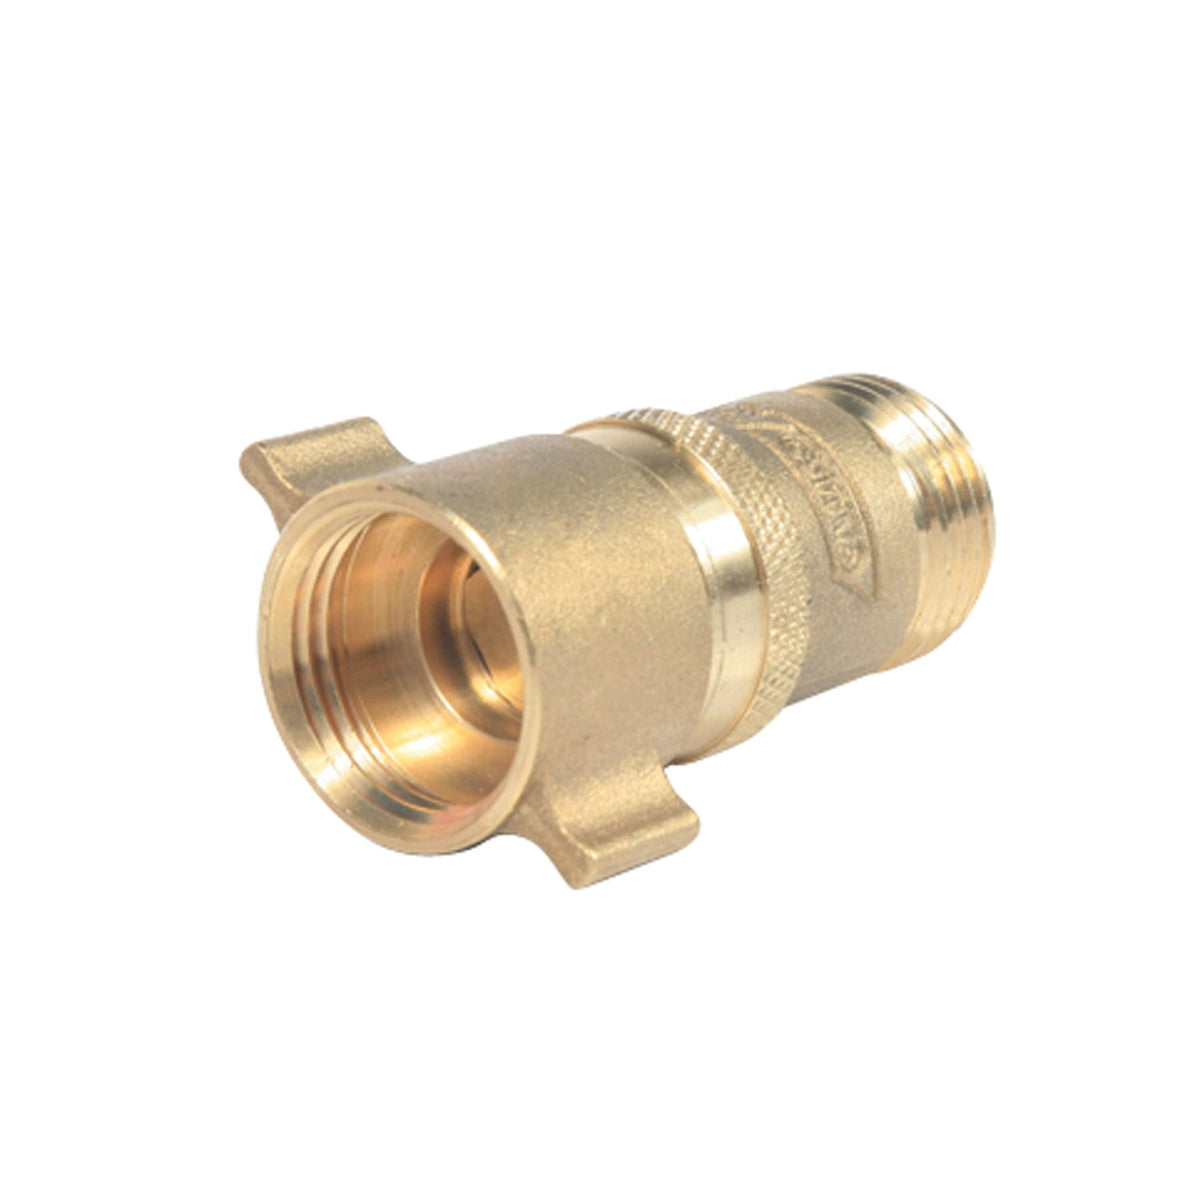 Camco Qualifies for Free Shipping Camco Brass Water Pressure Regulator 3/4" #40055